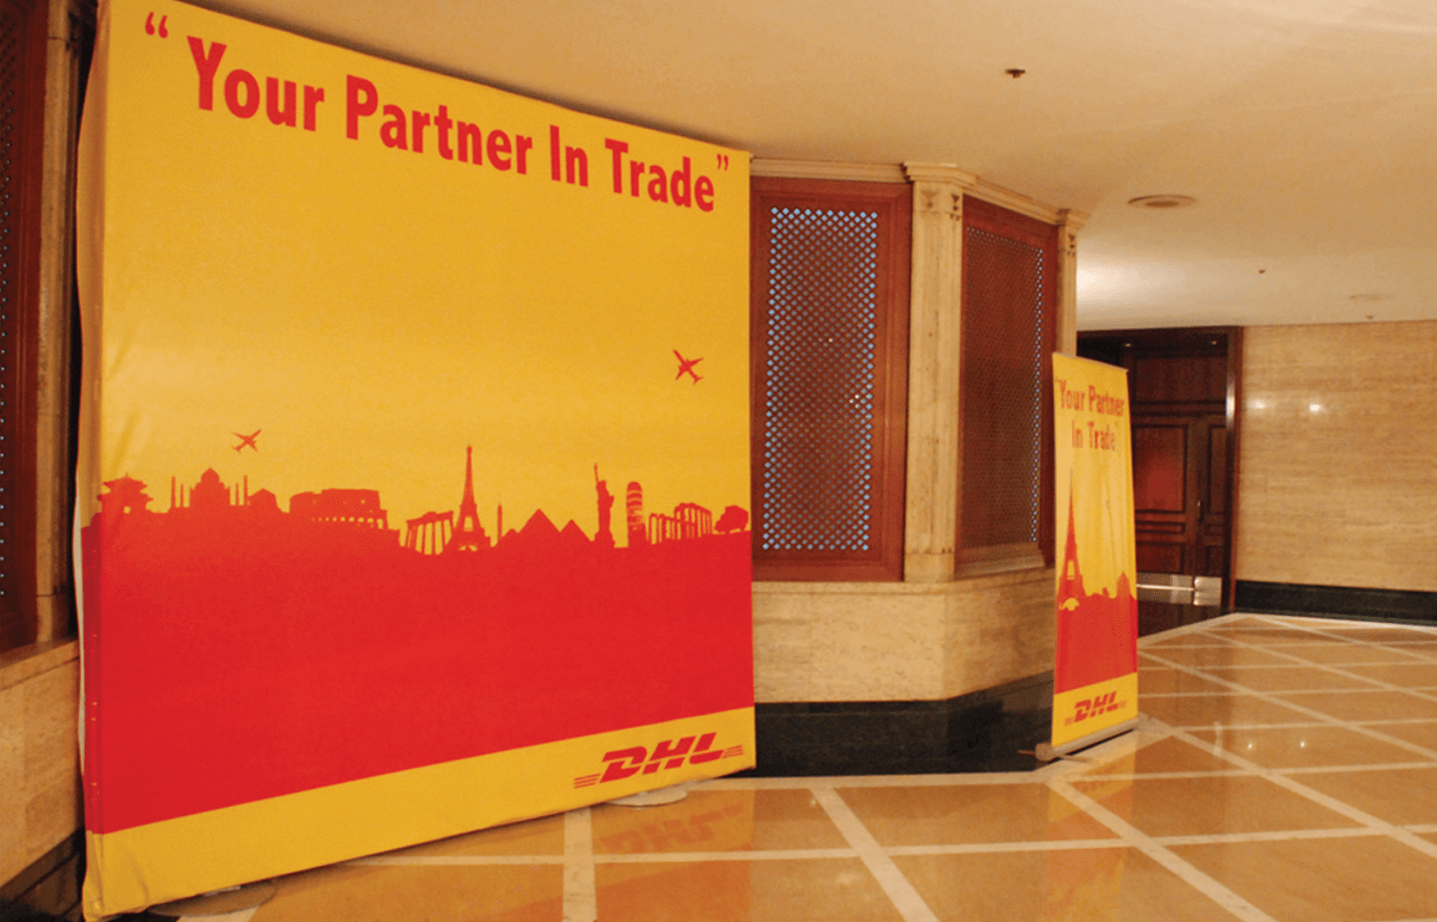 DHL Event